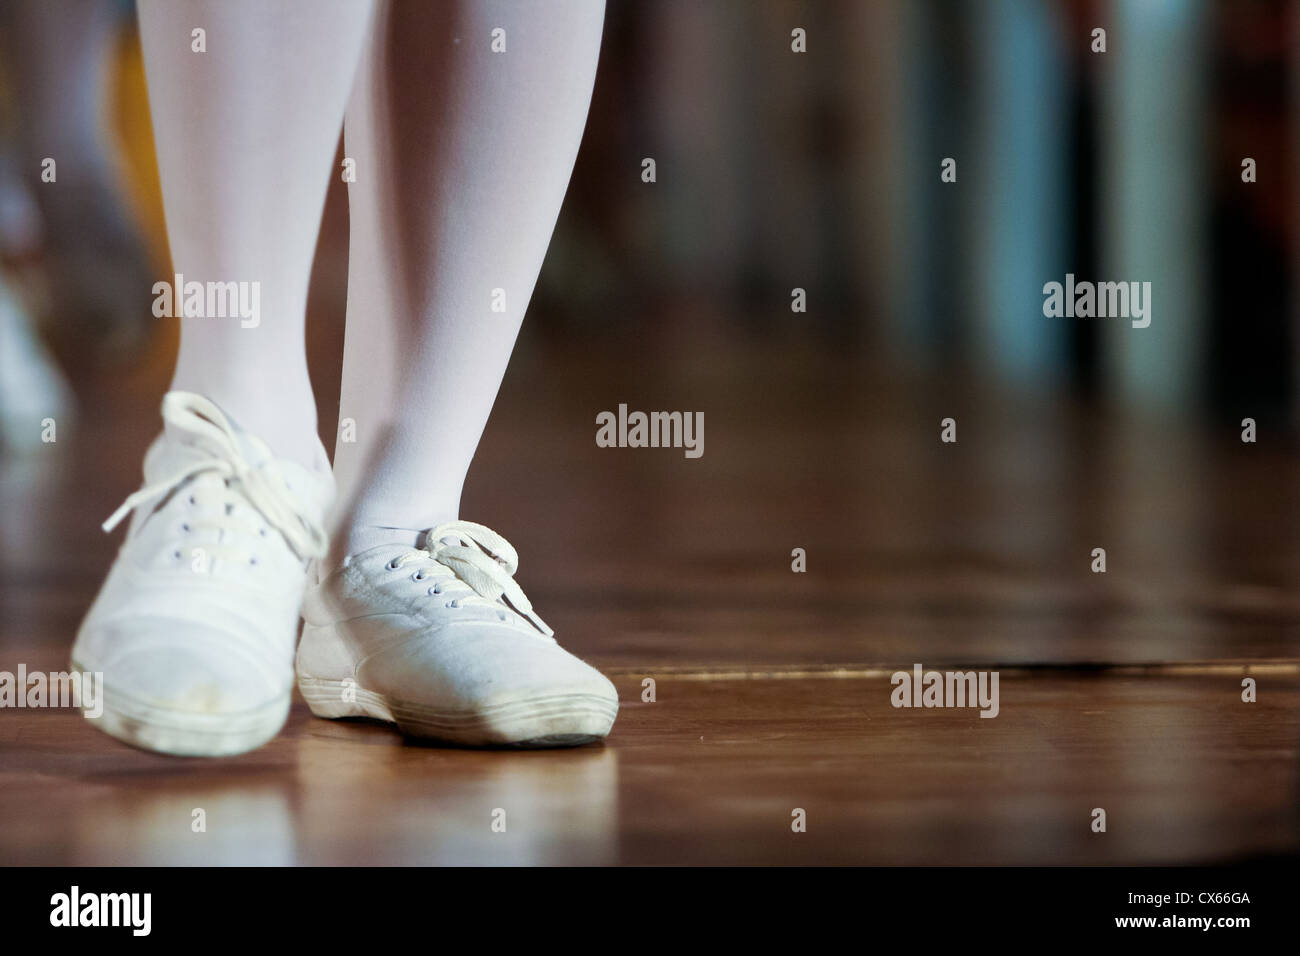 Feet of a dancer taking position in a performance. Stock Photo